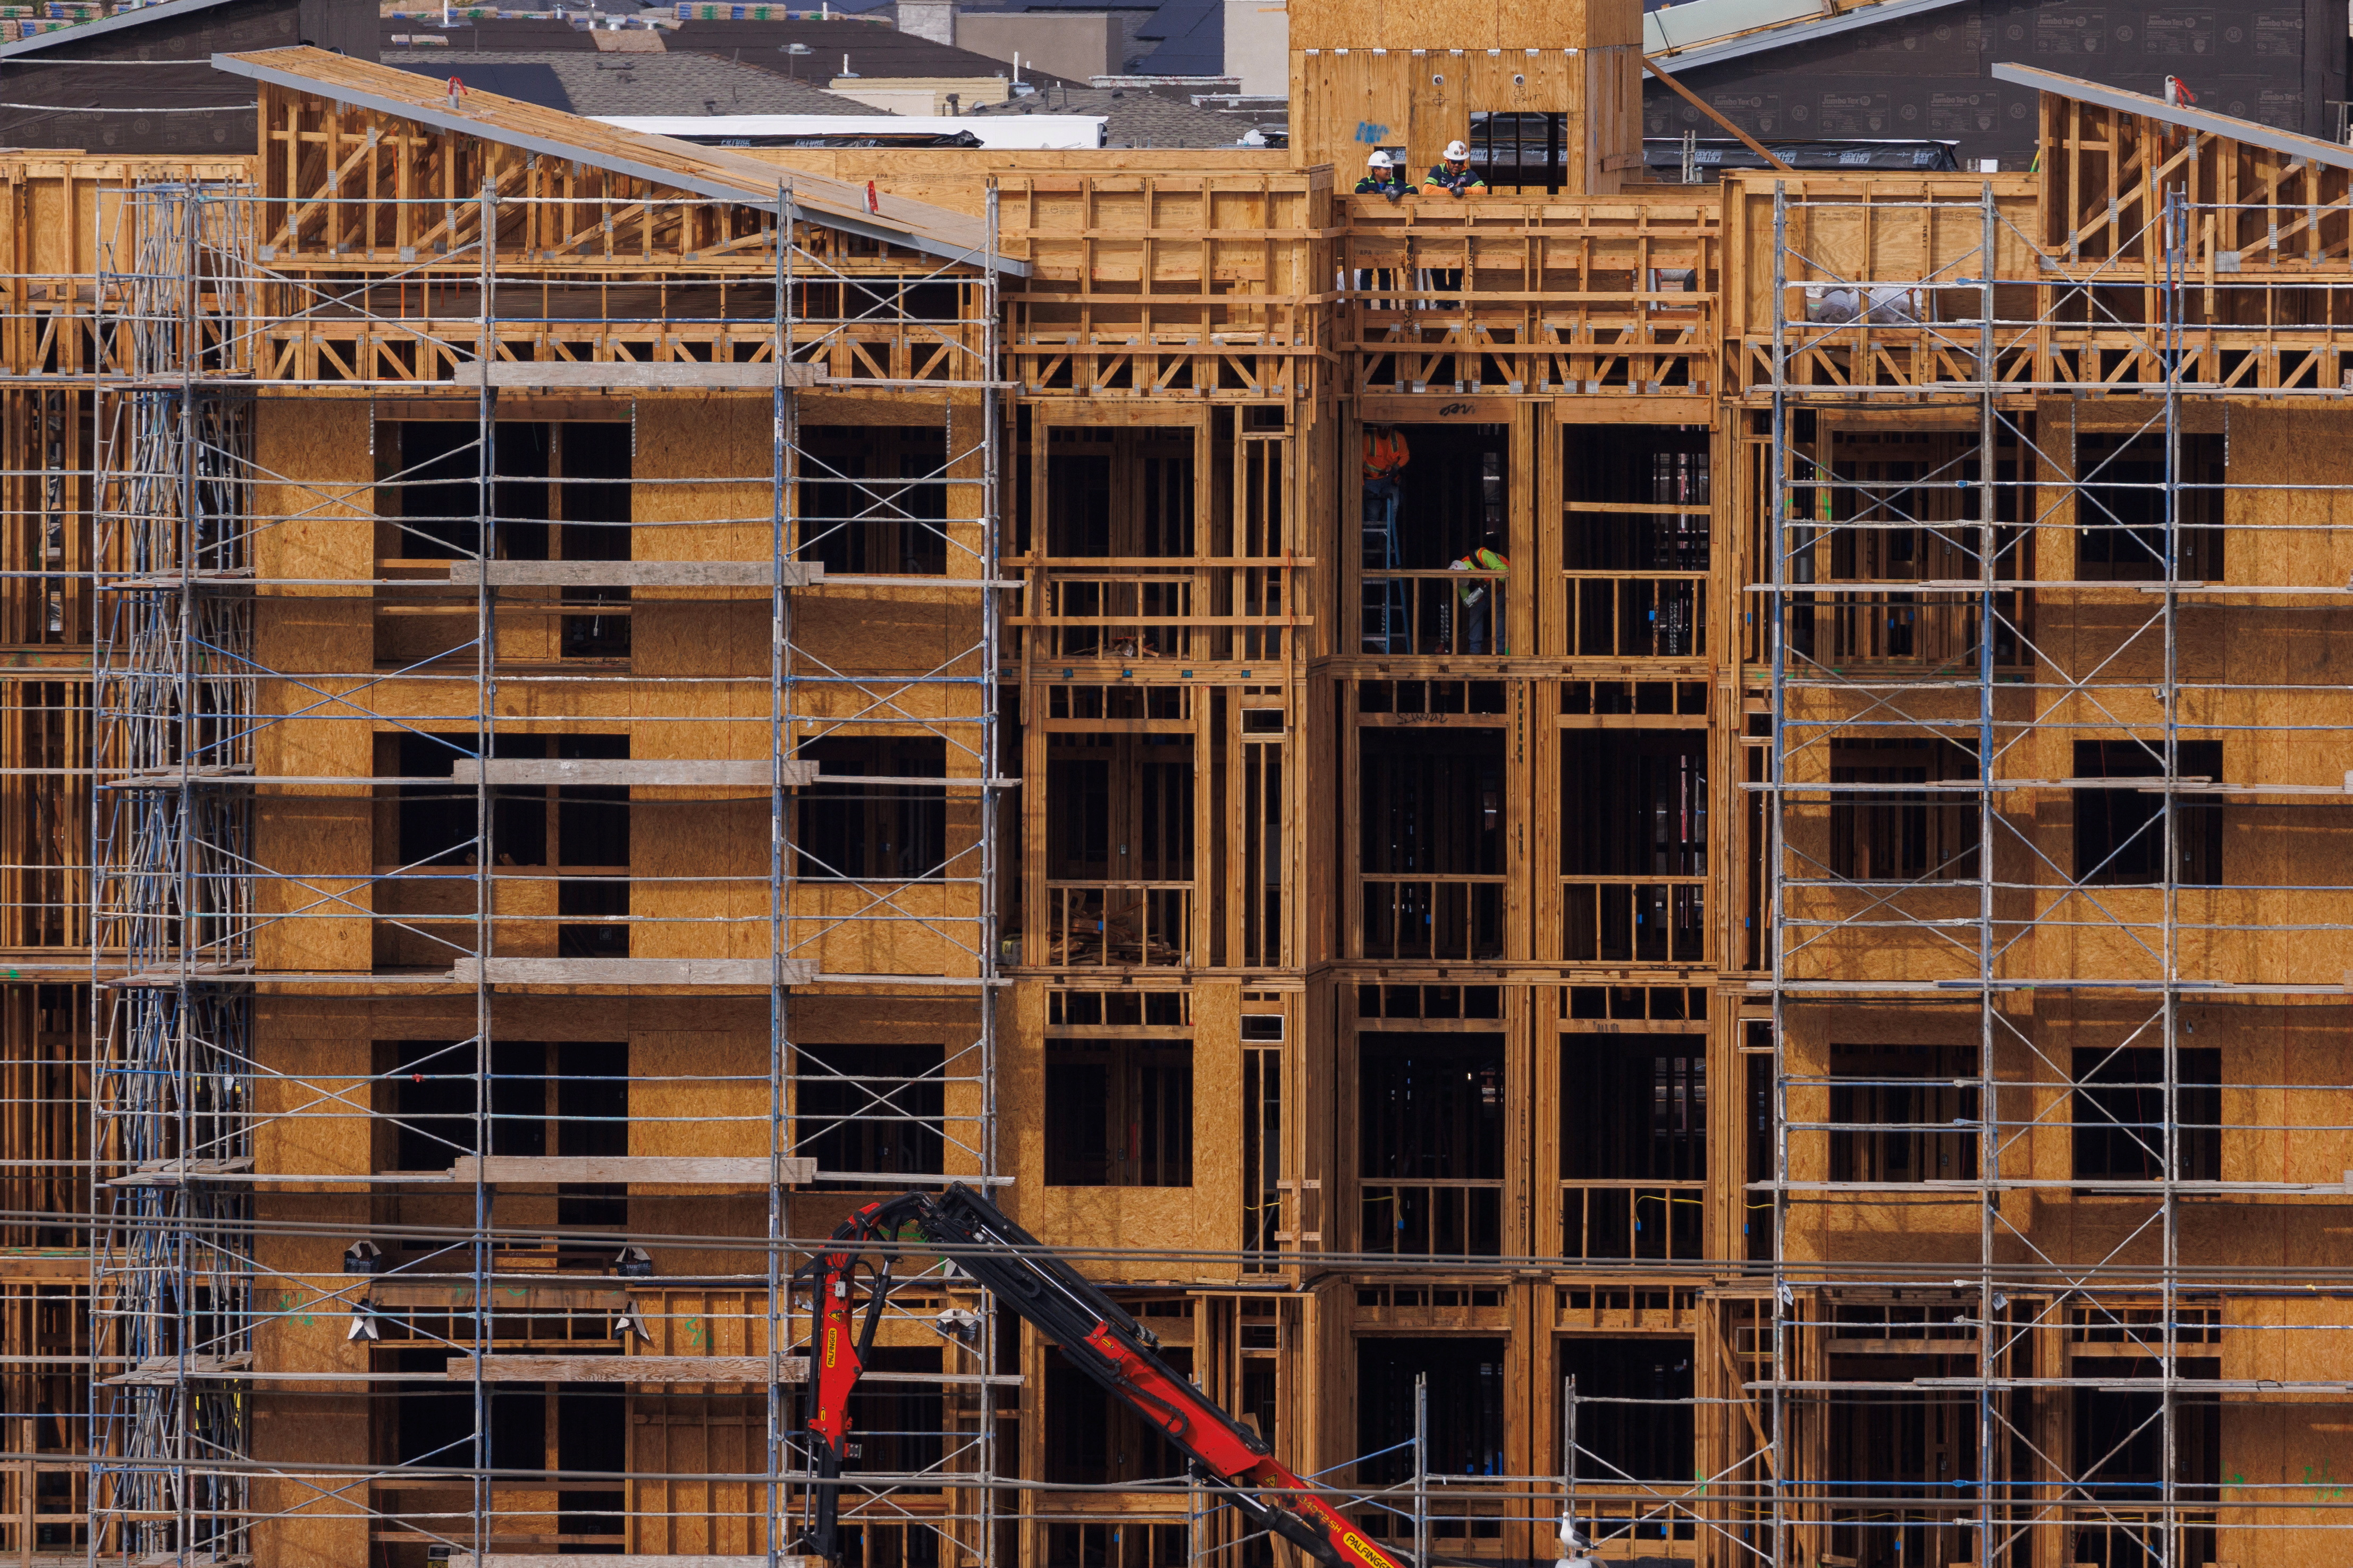 Construction workers build multifamily housing in California